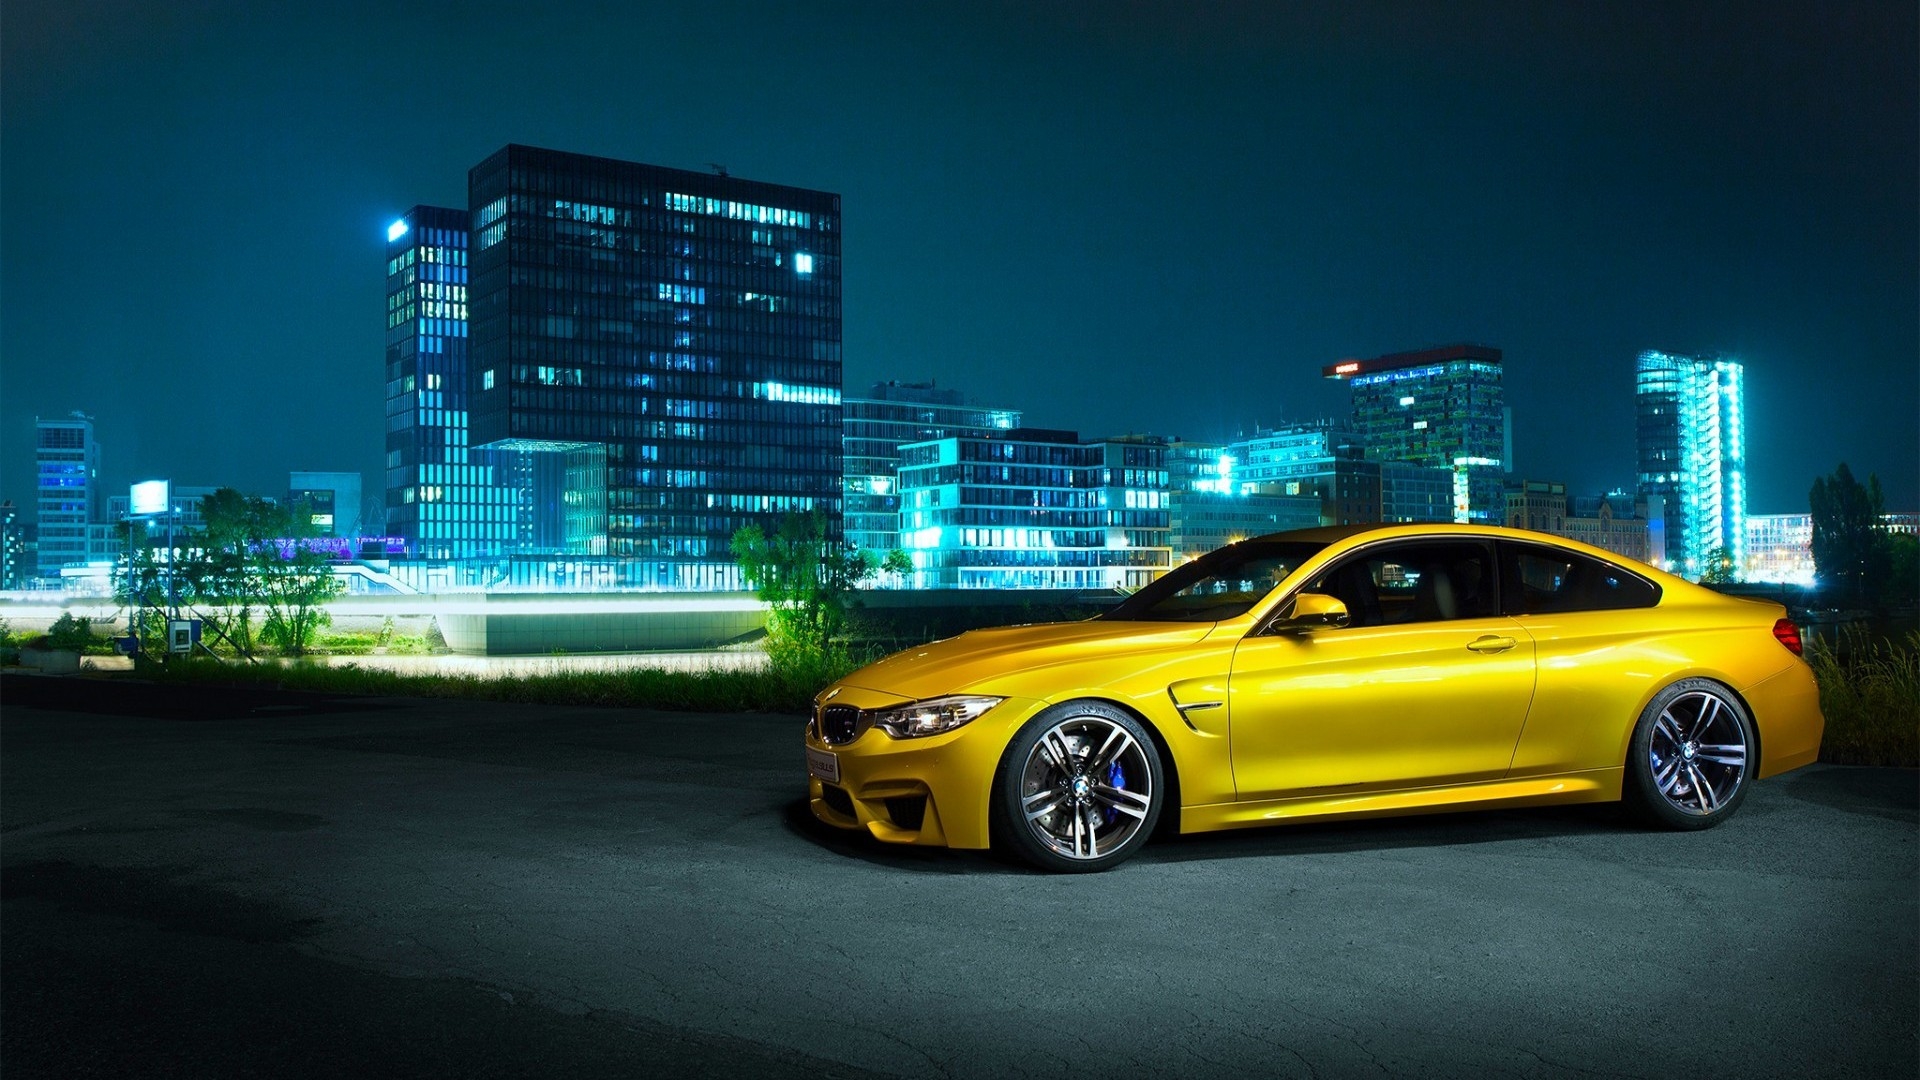 Gorgeous BMW M4 Coupe for 1920 x 1080 HDTV 1080p resolution